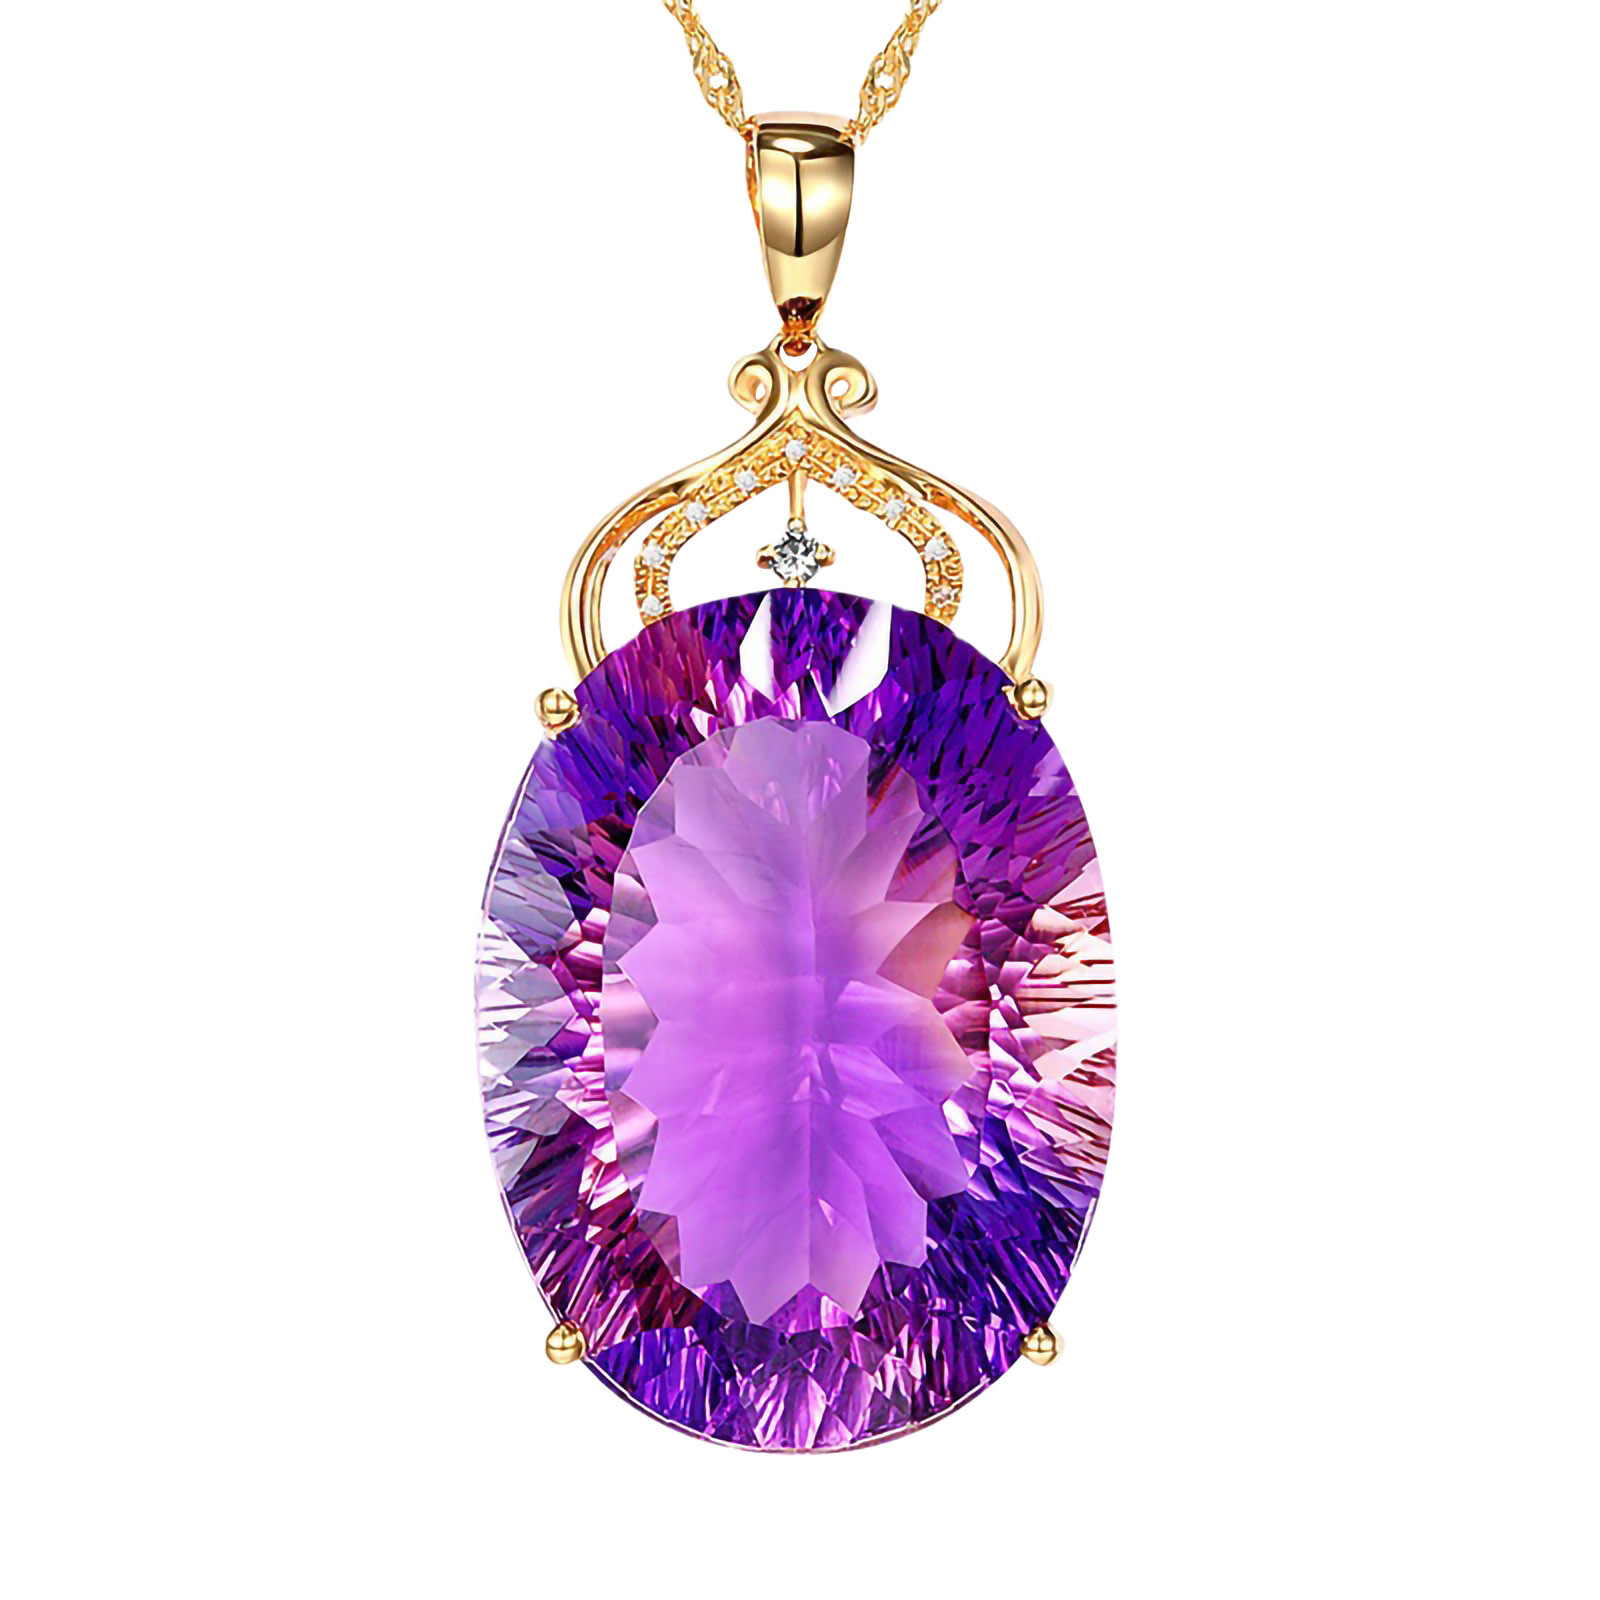 Apmemiss Wholesale European And American Ladies Fashion Luxury Amethyst Pendant Necklace Amethyst Gemstone Necklace Jewelry - image 1 of 8